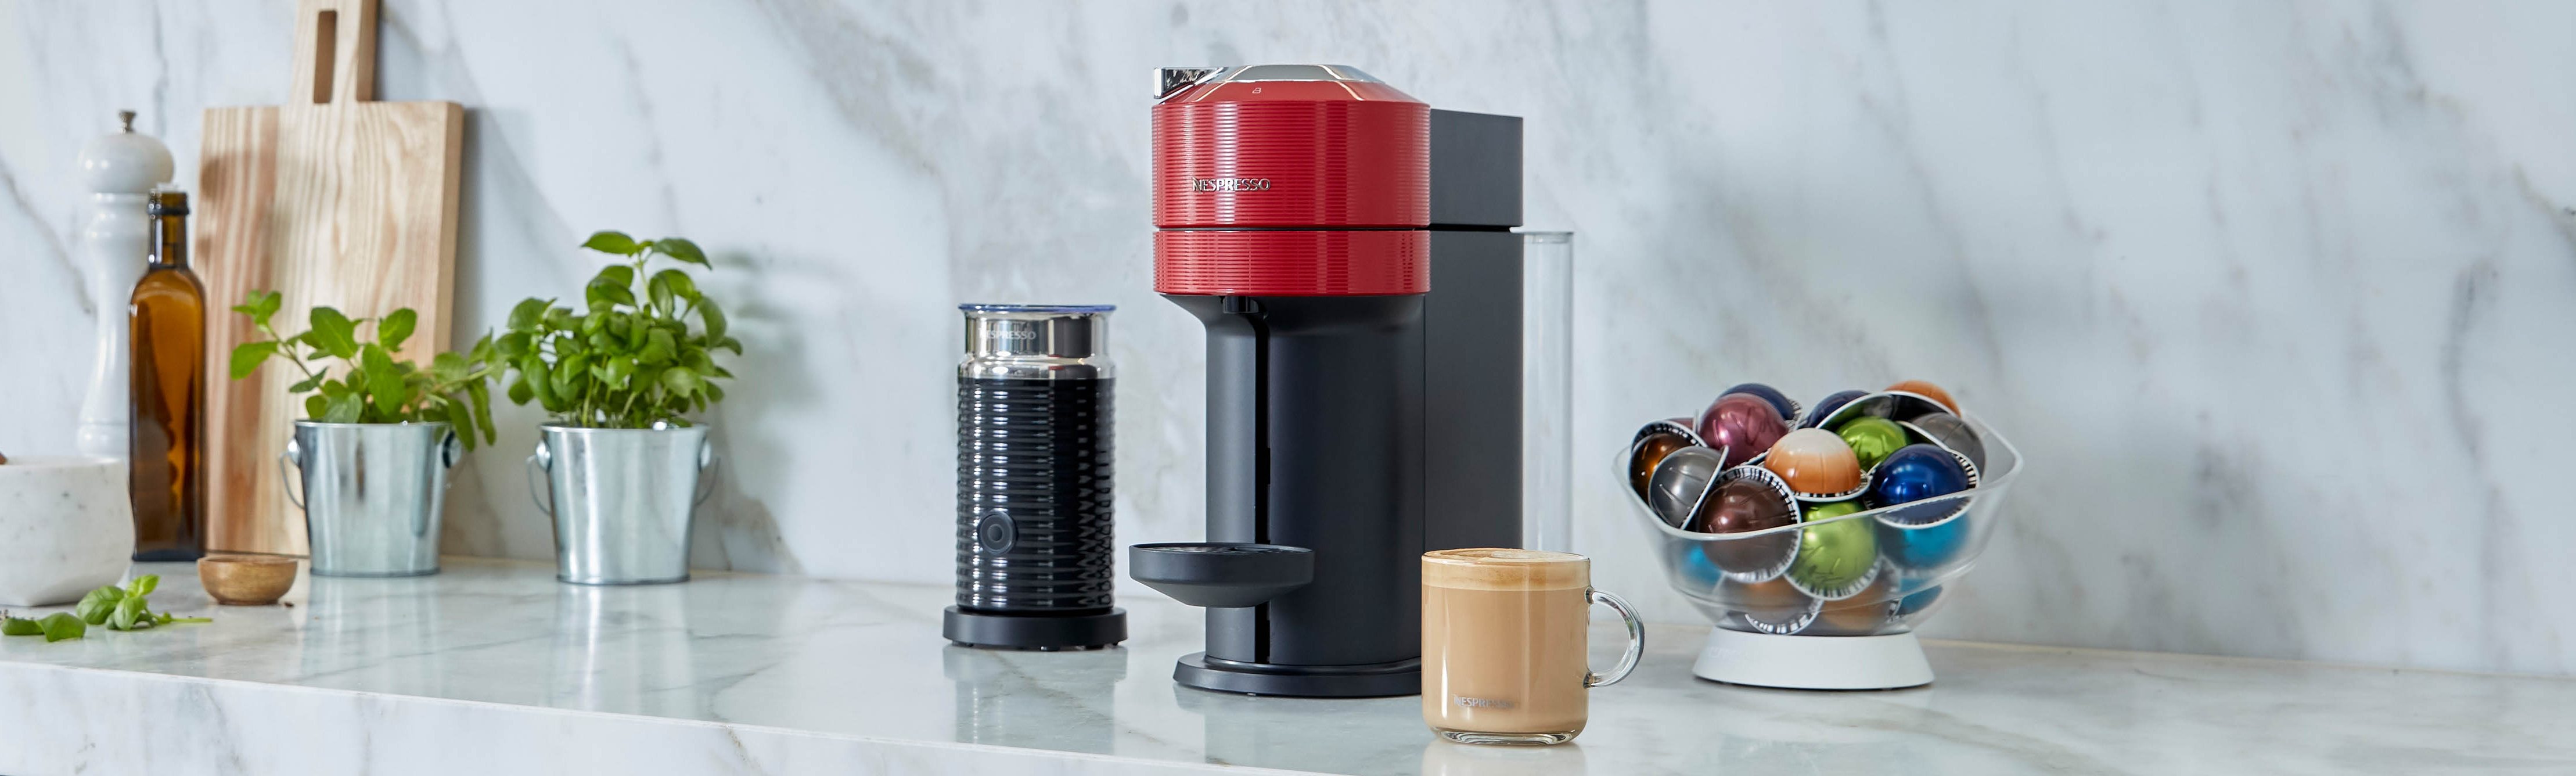 Types of coffee machines for home, office and commercial use